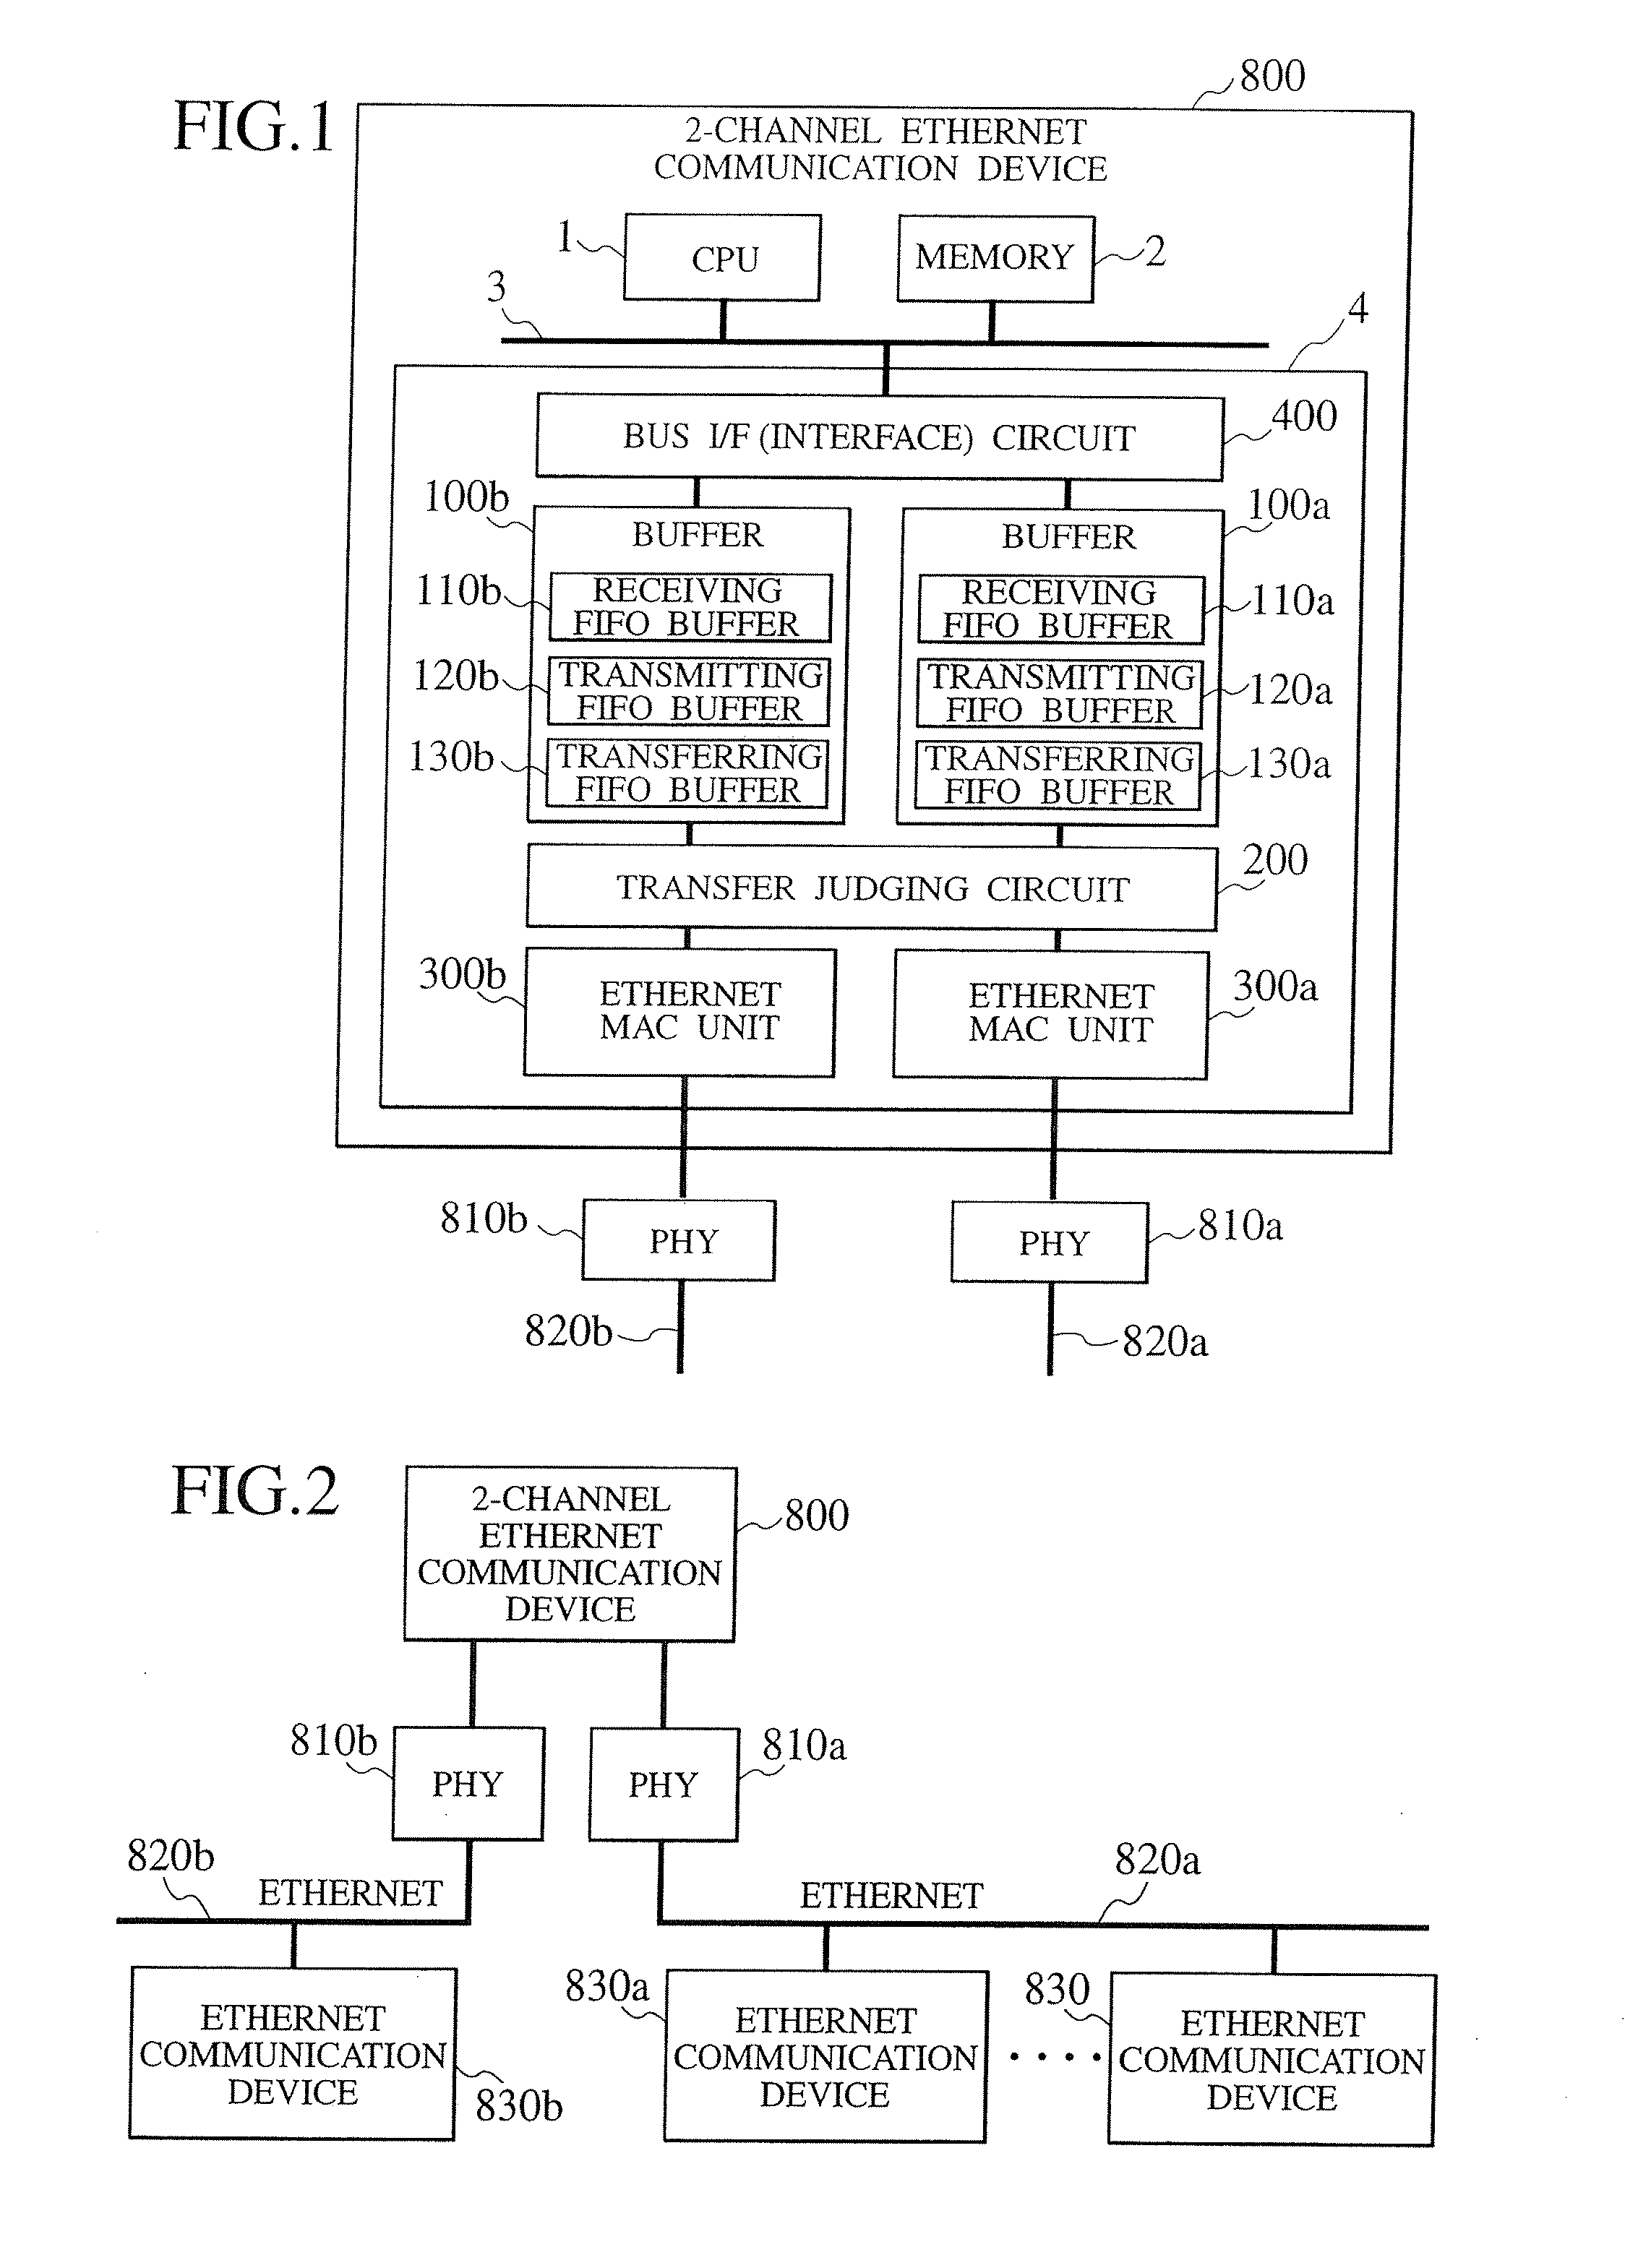 Packet communication device, packet communication system, packet communication system, packet communication module, data processor, and data transfer system